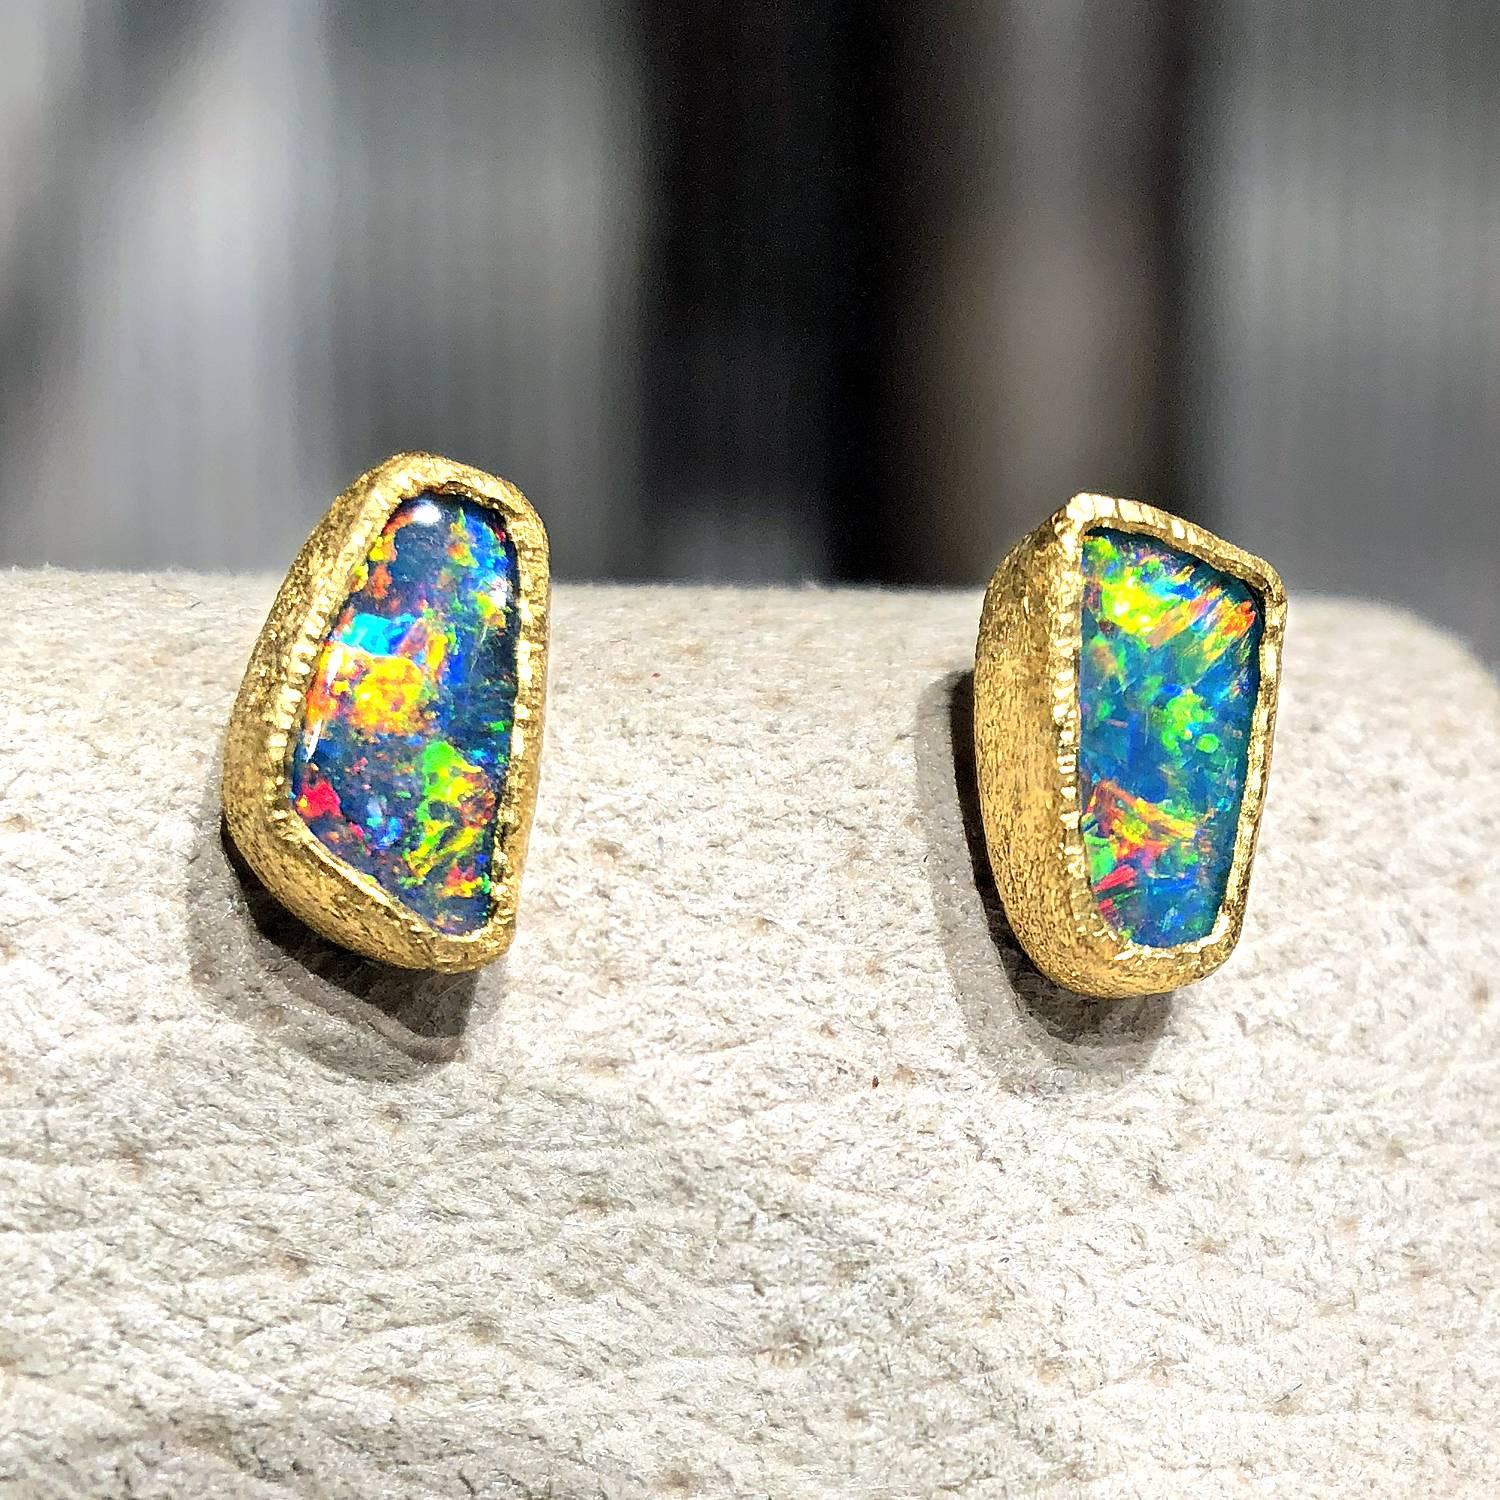 One of a Kind Stud Earrings handcrafted by acclaimed jewelry designer Devta Doolan with blue opal doublets exhibiting a vibrant multicolored confetti flash - primarily electrifying red fire with accents of green, orange, blue, yellow, violet, and